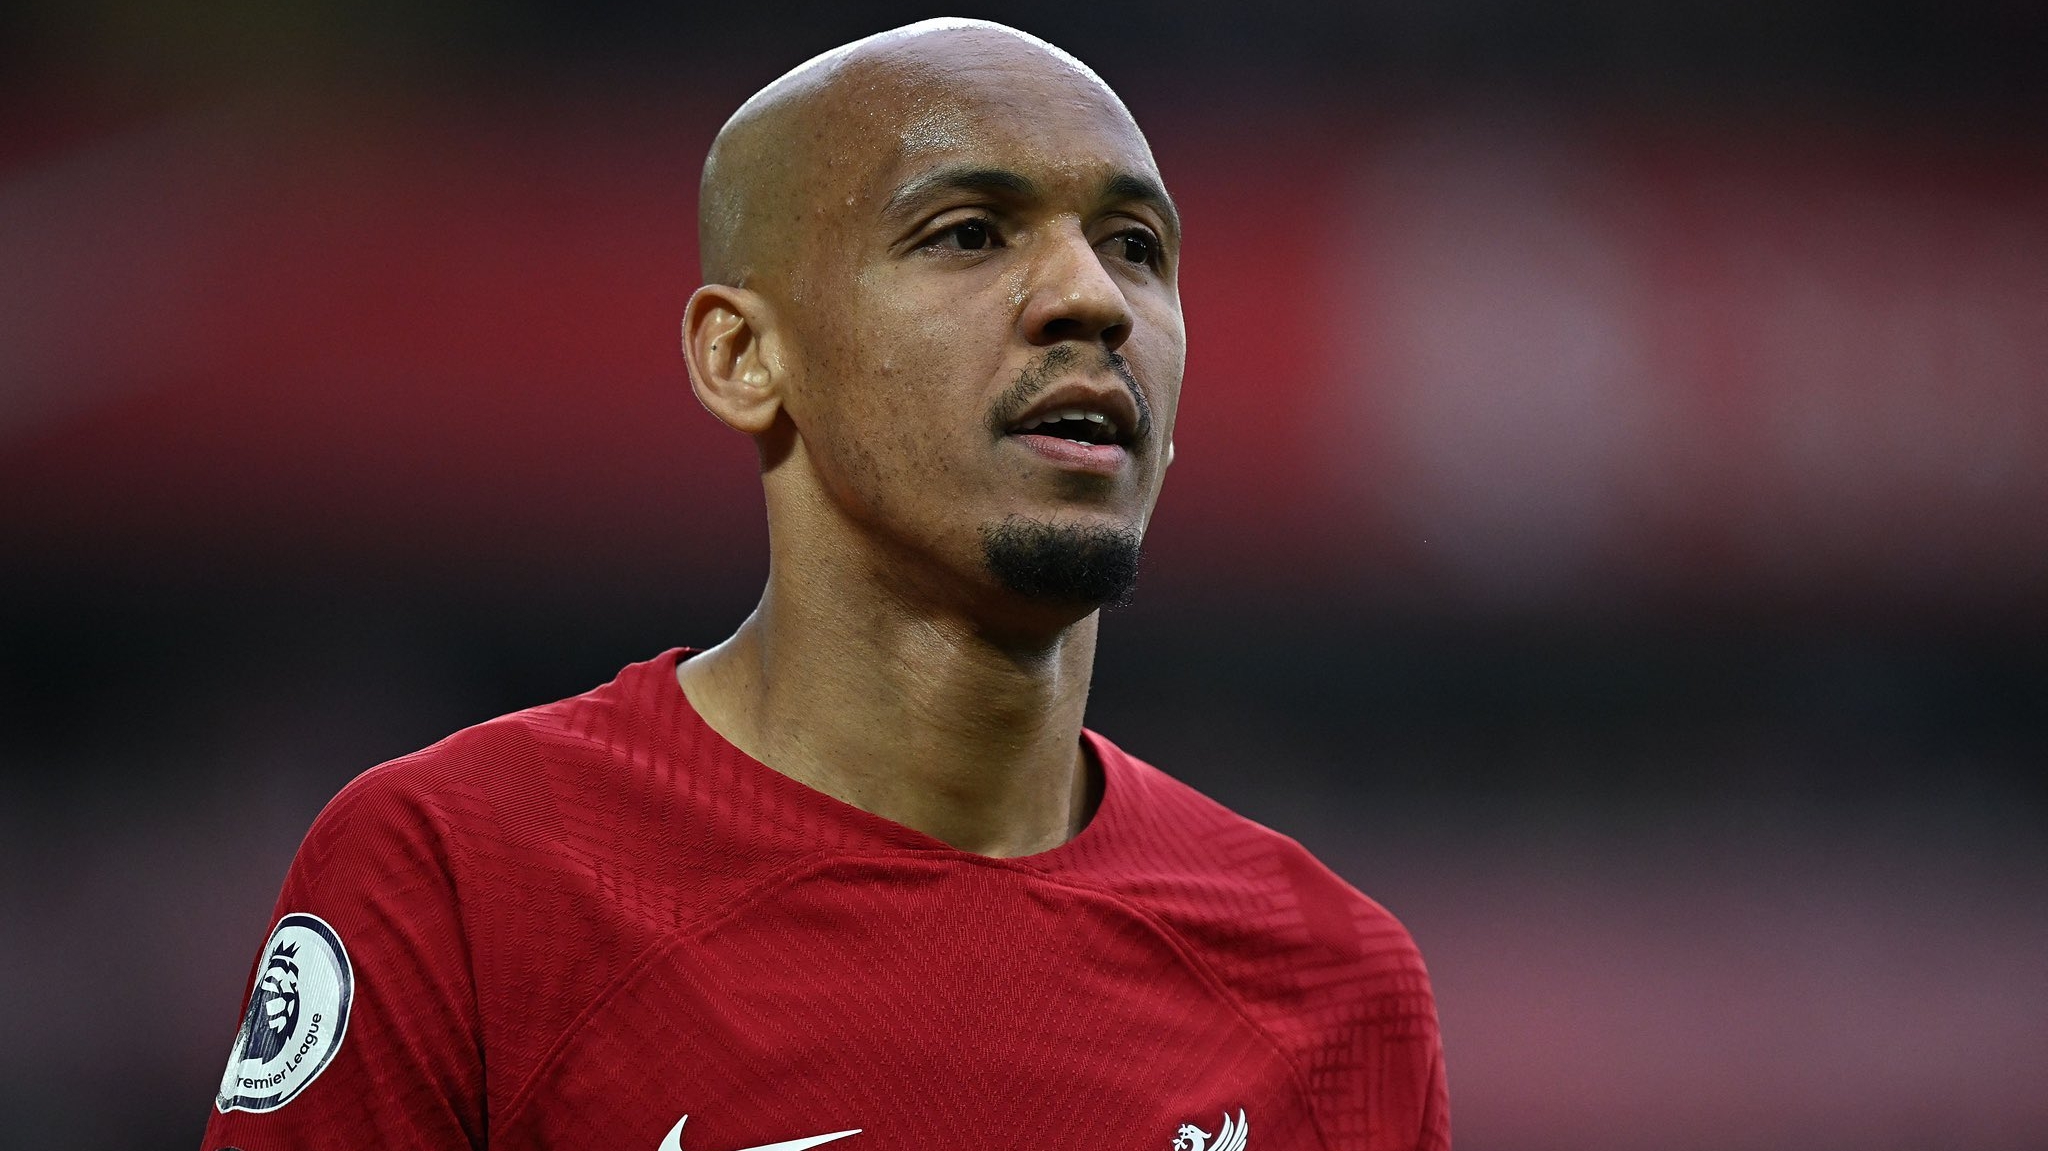 Fabinho leaves Liverpool and signs a millionaire transfer to the